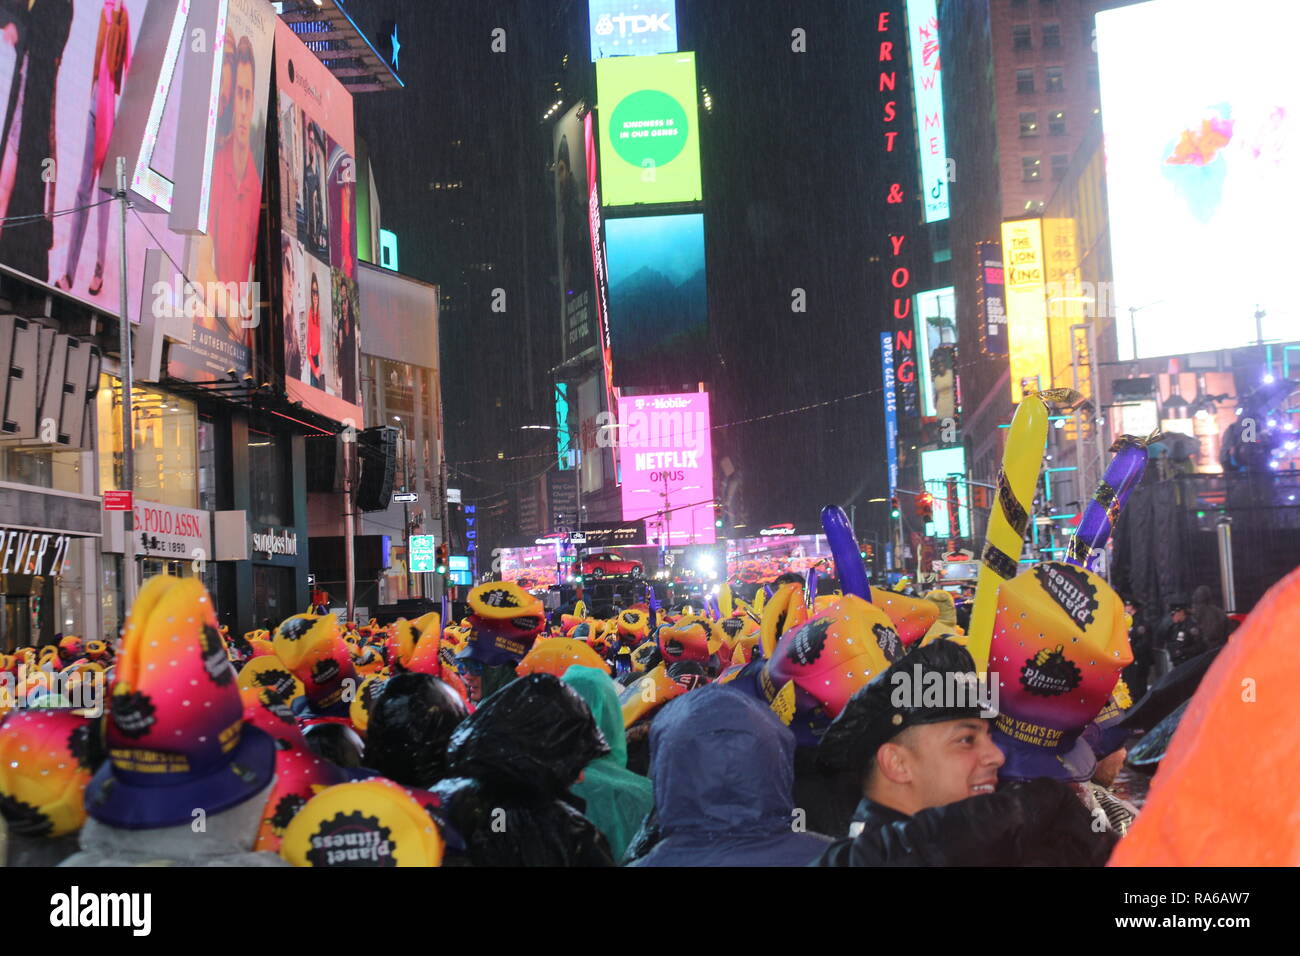 People are seen gathered at the Times Square during the New Year's Eve celebrations. Despite all day rain, More than 2 million people participate at the New Year's Eve celebrations at the Times Square. Stock Photo